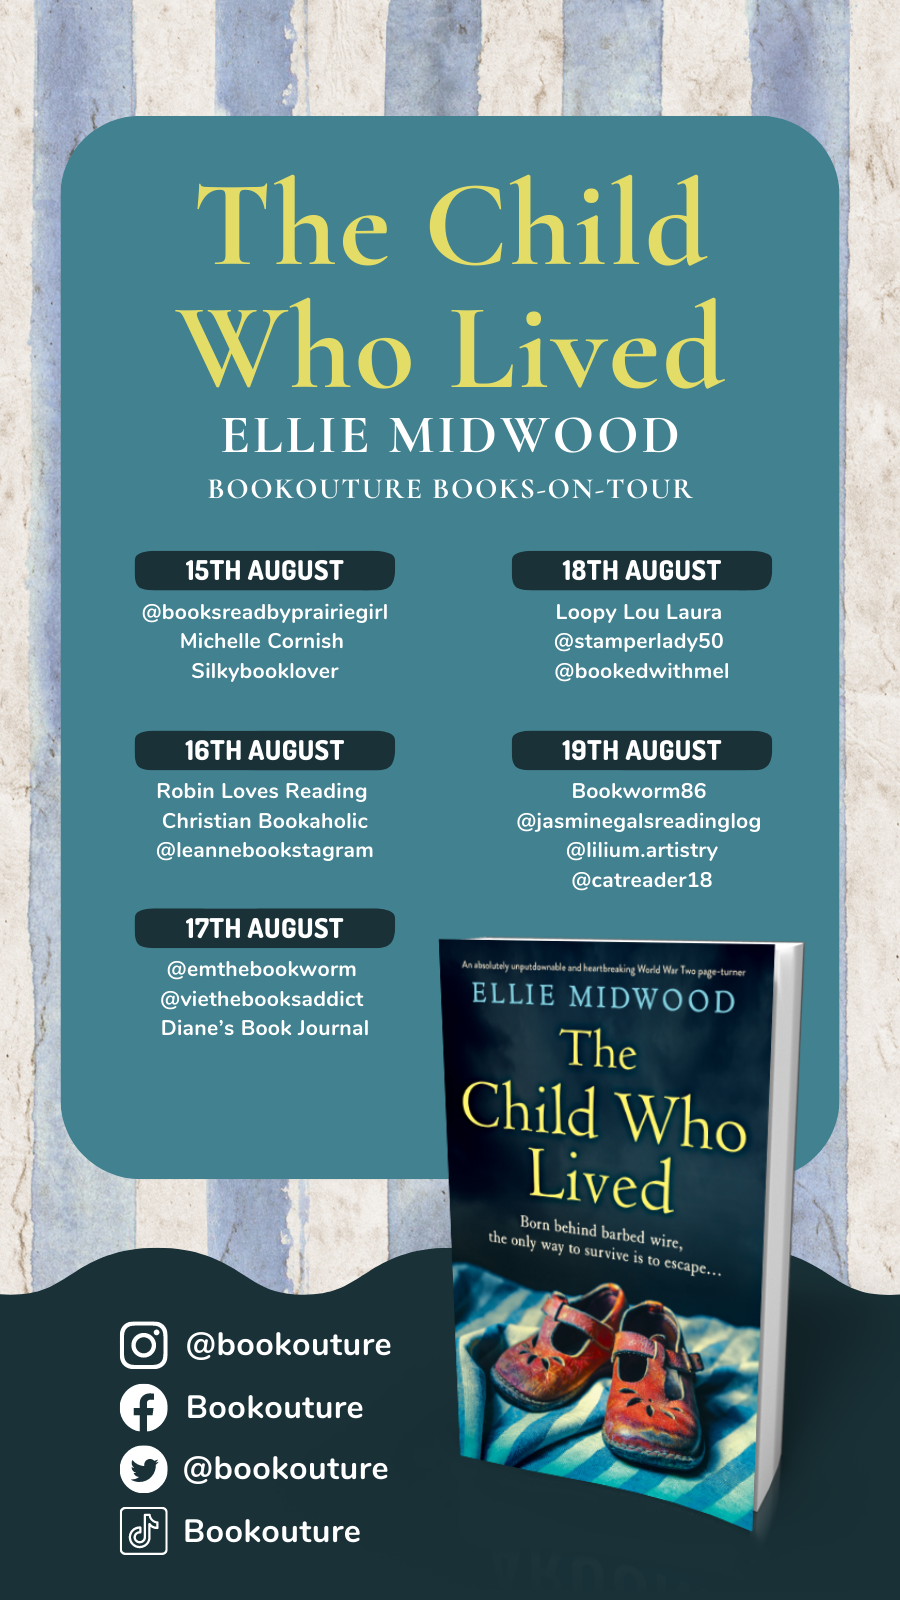 The Child Who Lived blog tour dates